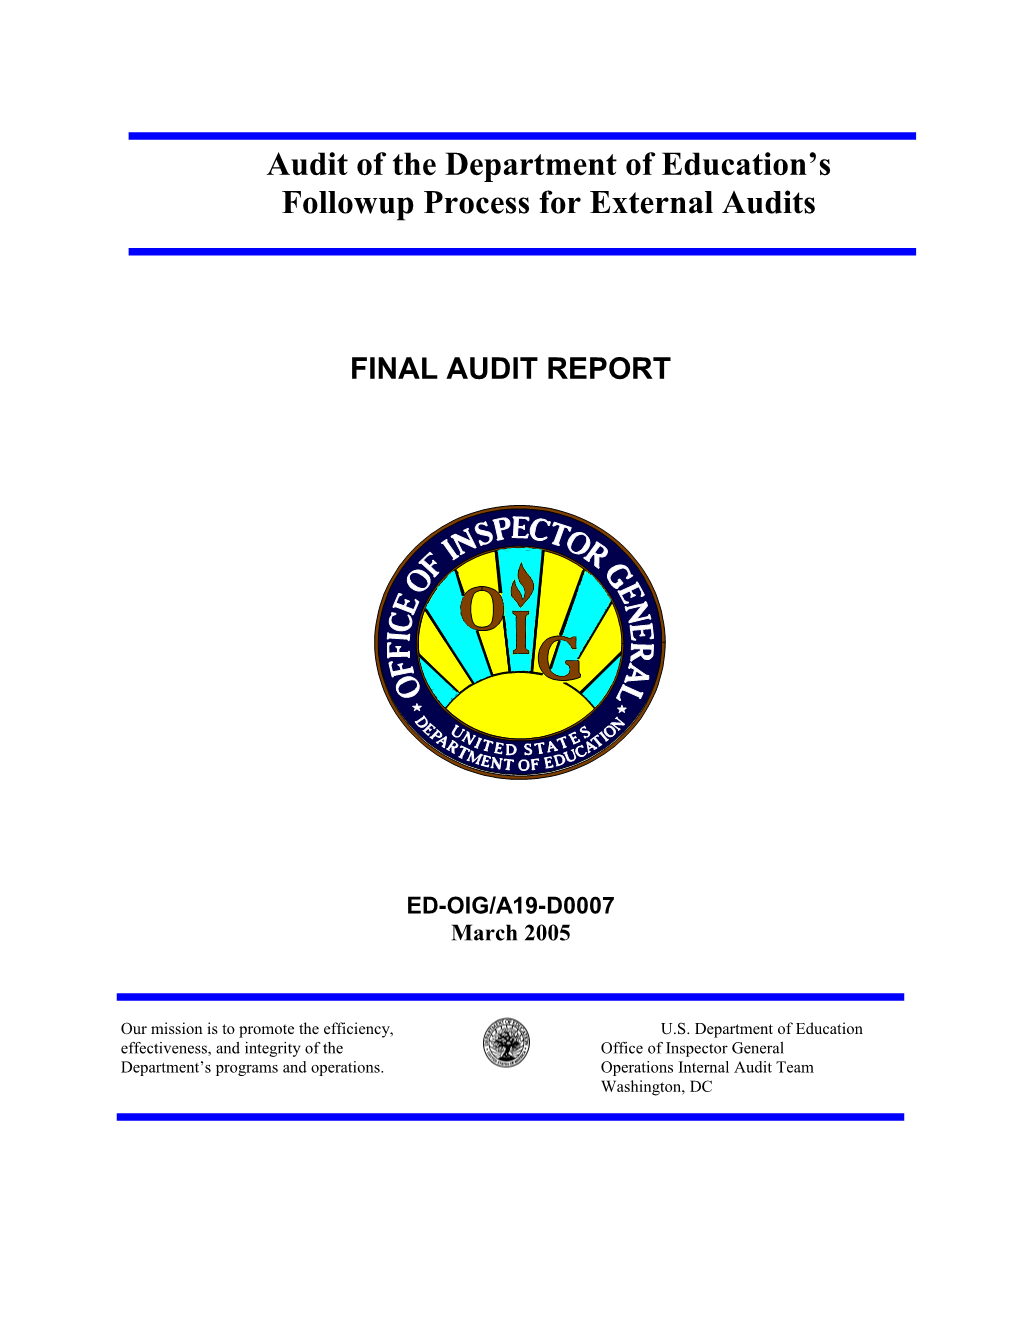 Department of Education's Followup Process for External Audits (MS Word)